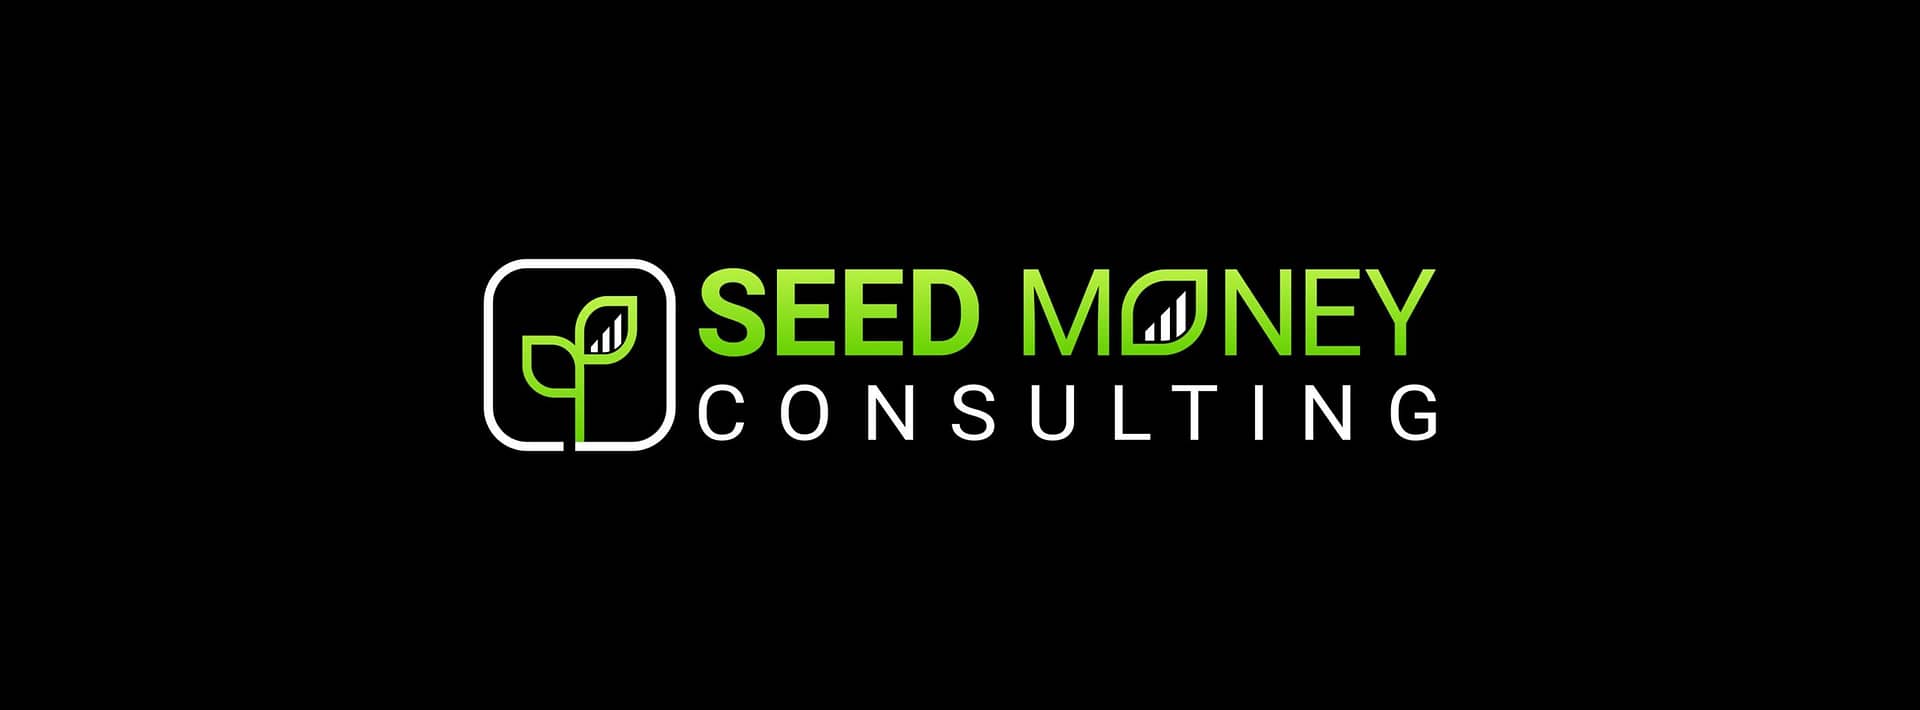 Seed Money Consulting Image